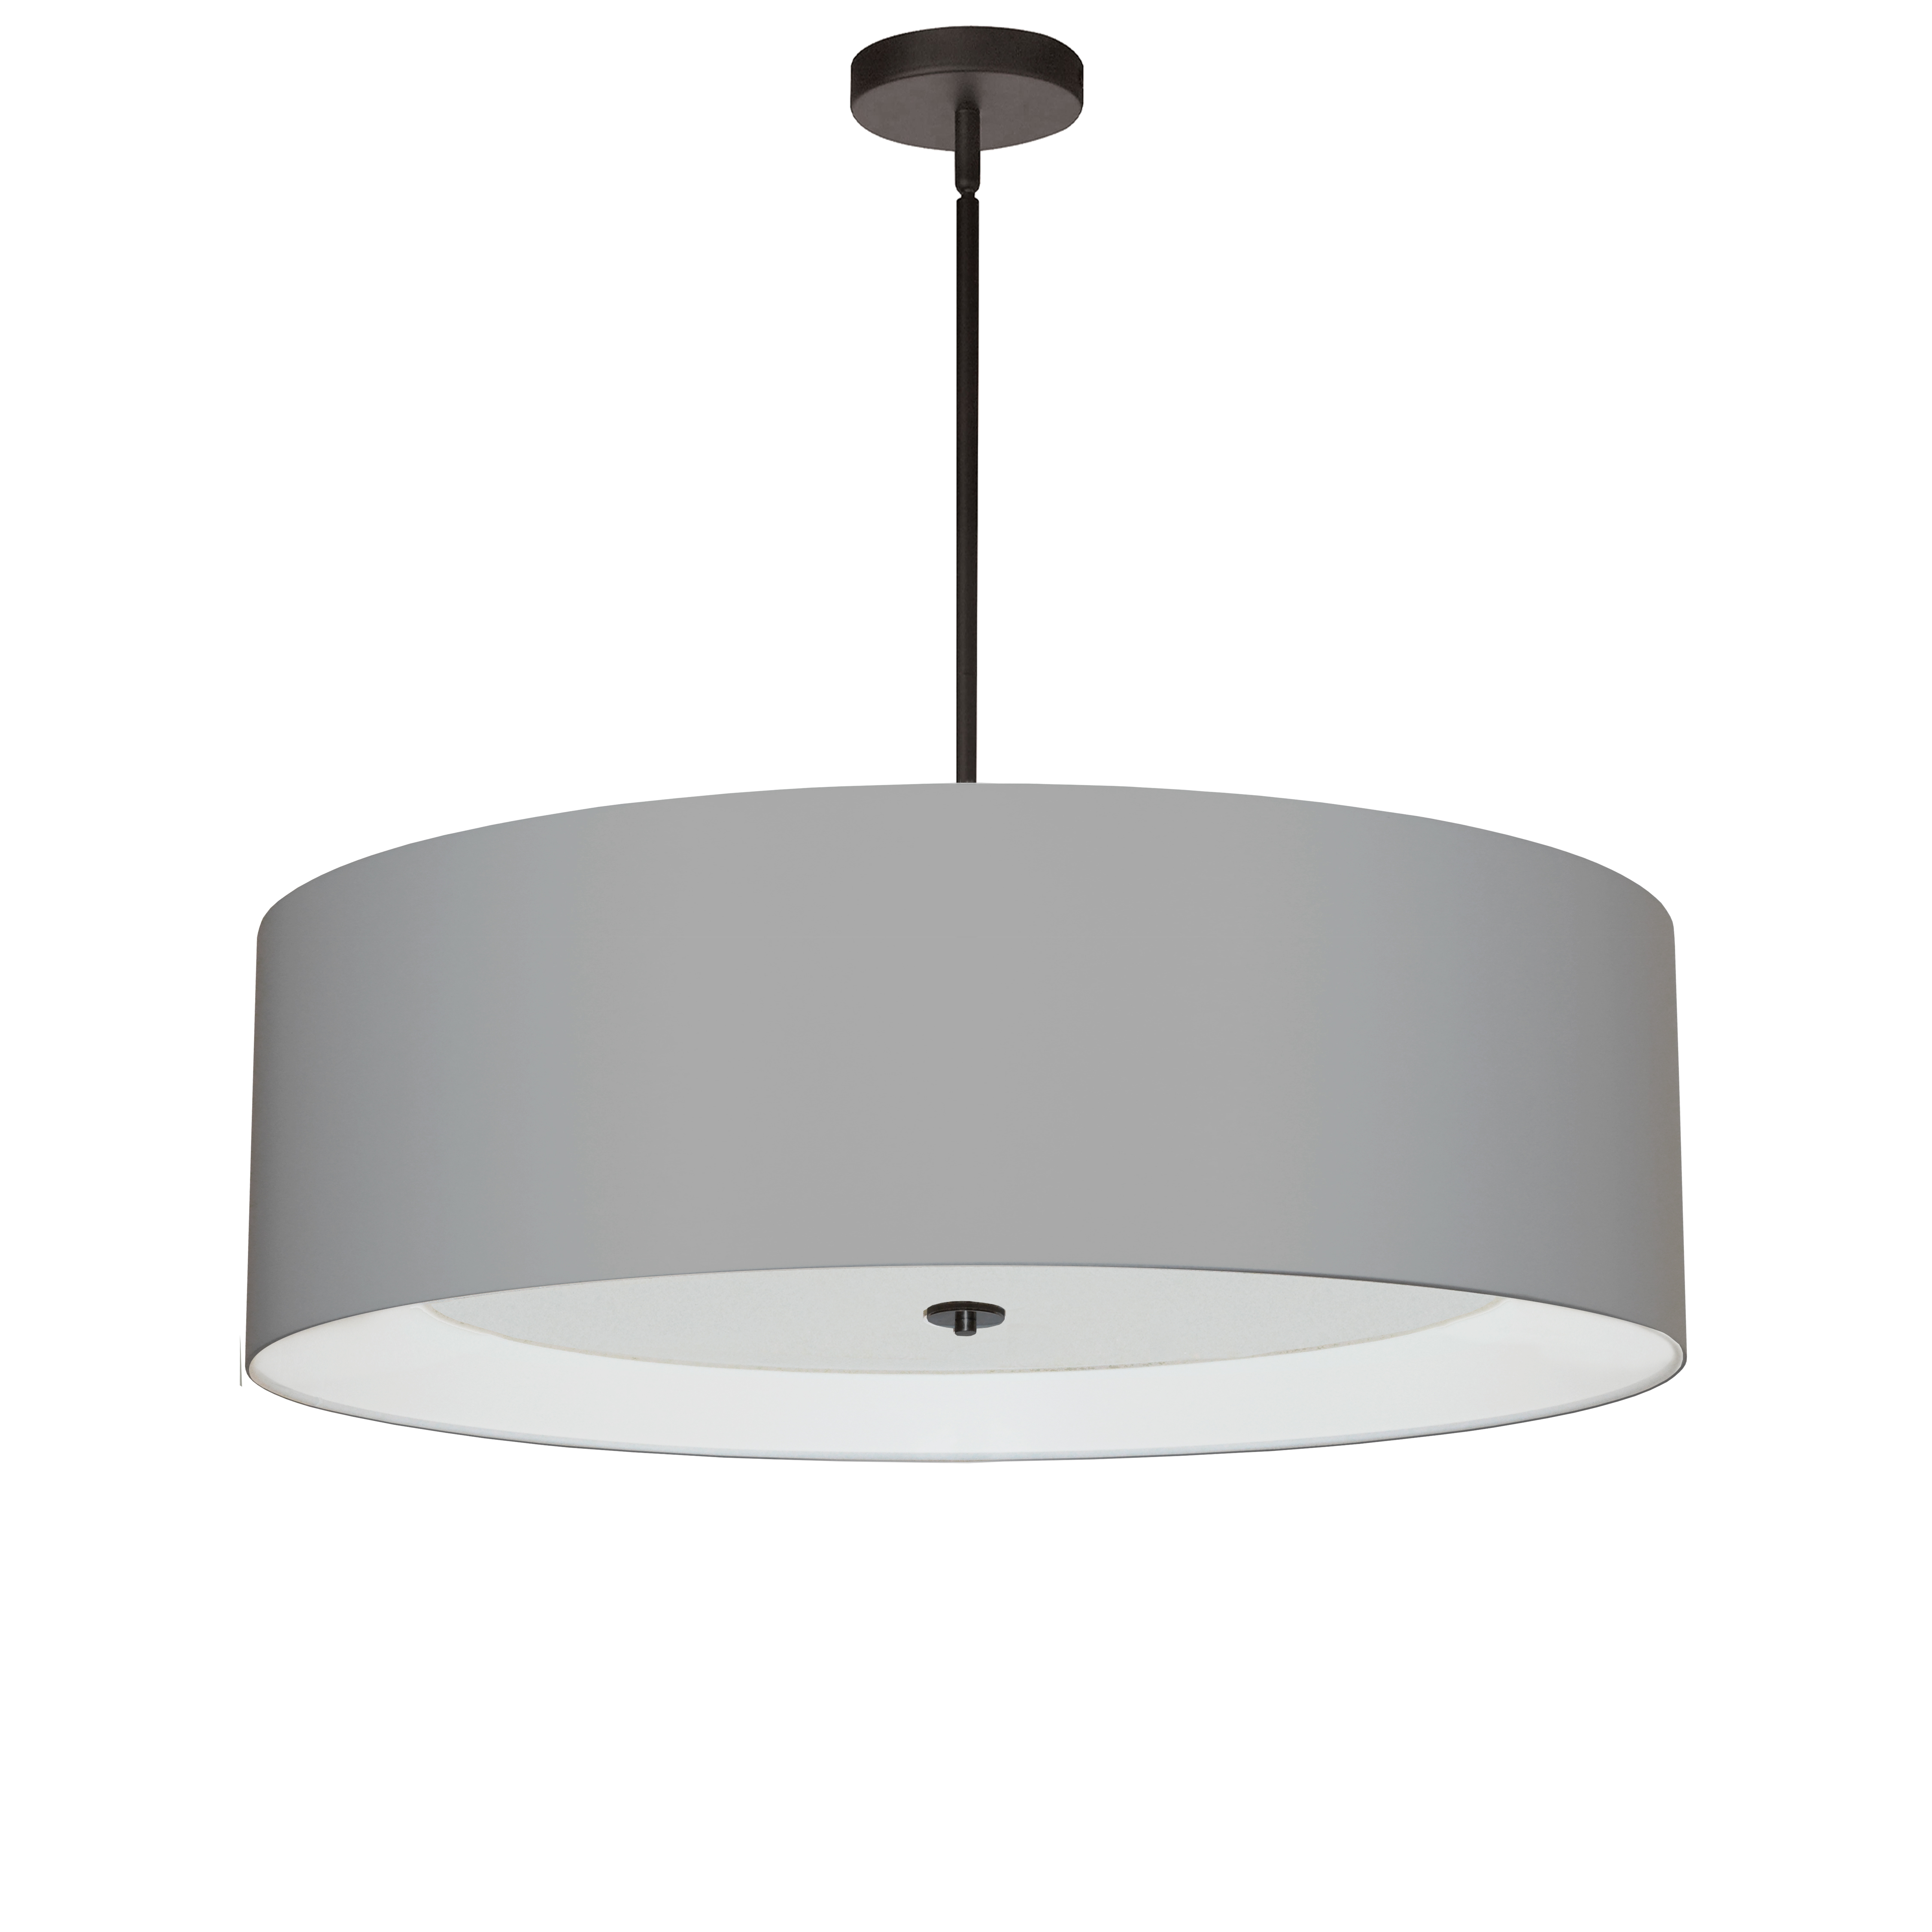 The eye is drawn to the polished minimalism of the Helena family of lighting. The effect is subtle and stylish, making a statement in luxury for discerning tastes.  A minimalist frame in metal with a polished chrome finish is overshadowed by a large drum-style fabric shade in your choice of color. Inside the shade, a white fabric diffuser creates softer, skin-friendly lighting. The look can be set flush to the ceiling for an even more understated effect. Helena lighting adds a fashionable note to your foyer or dining room area, without taking the spotlight away from your overall décor scheme.